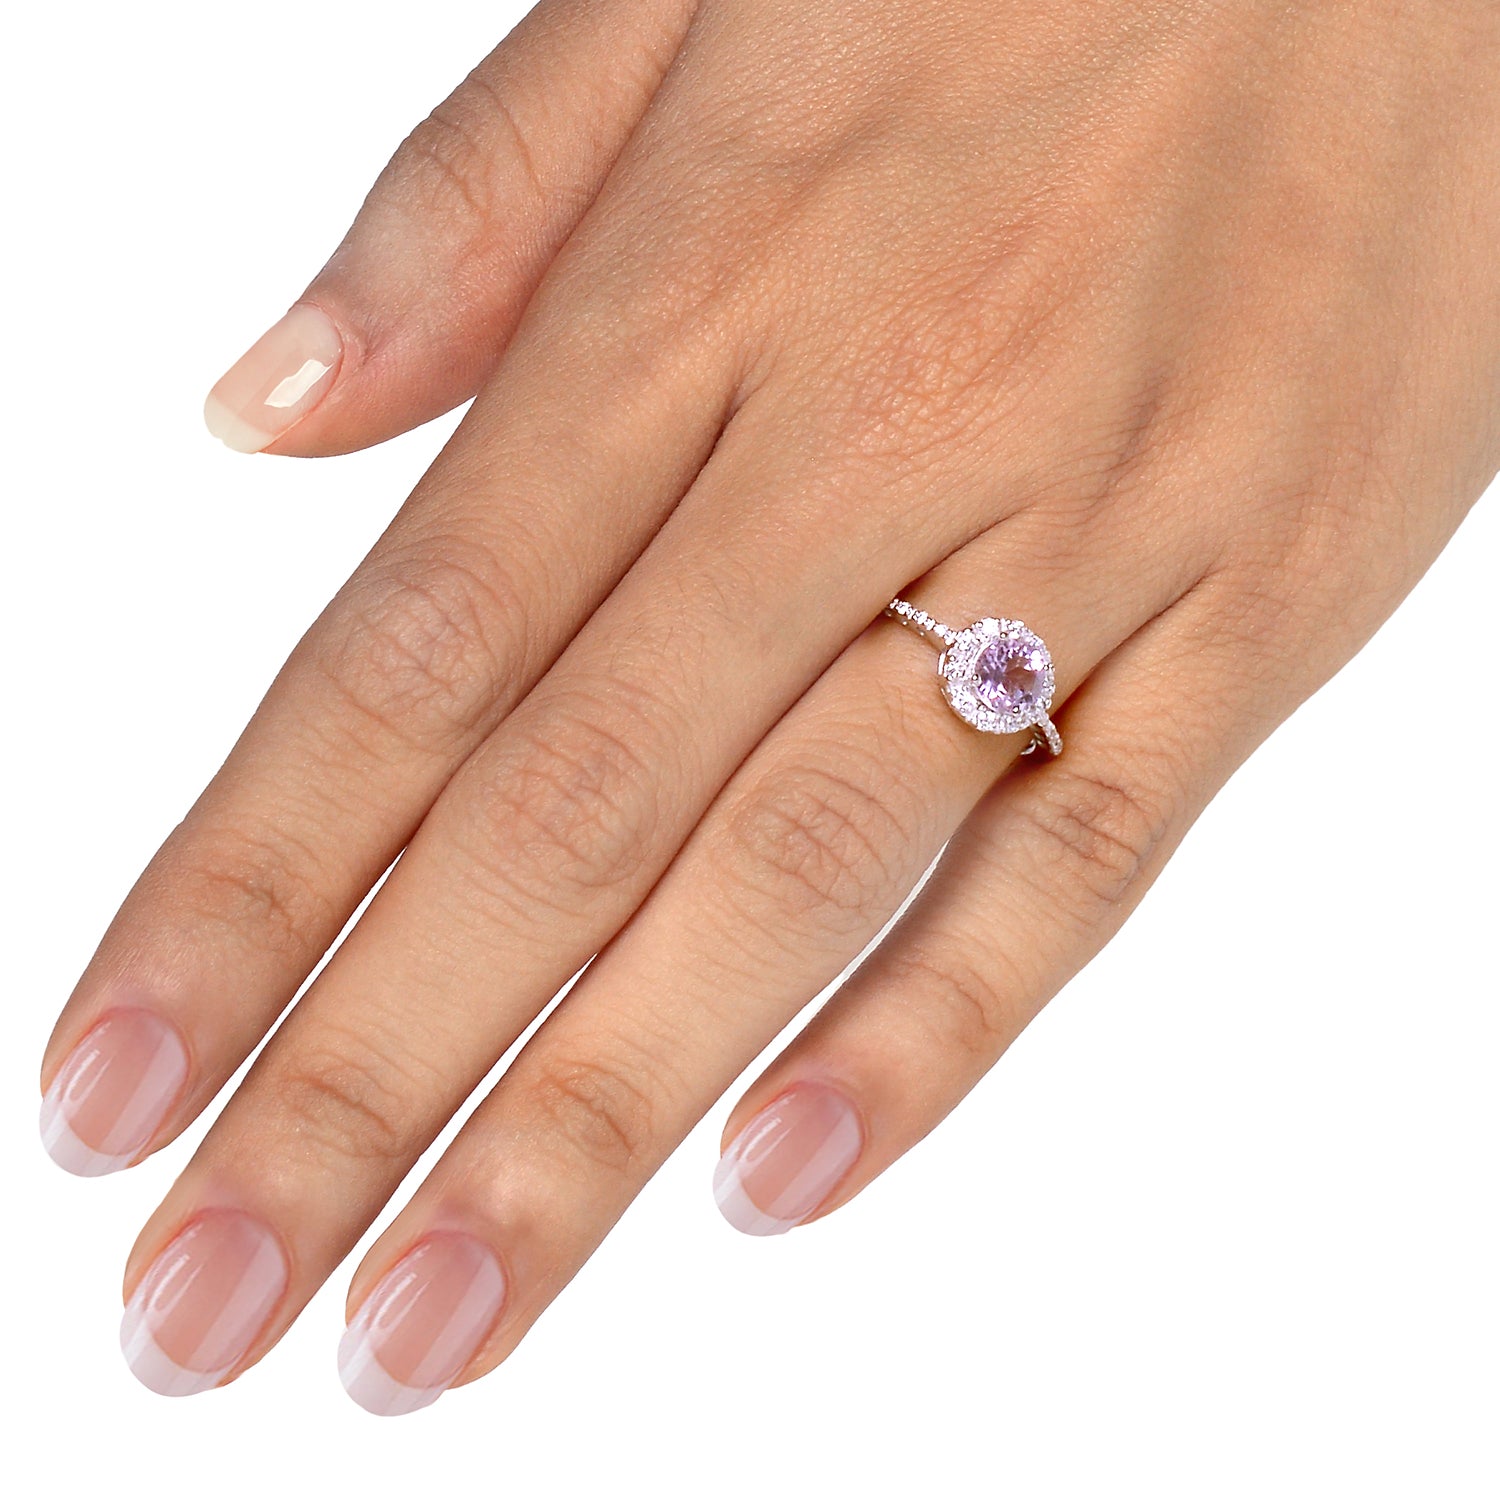 0.65 cttw Purple Amethyst Ring .925 Sterling Silver with Rhodium Round 6 MM